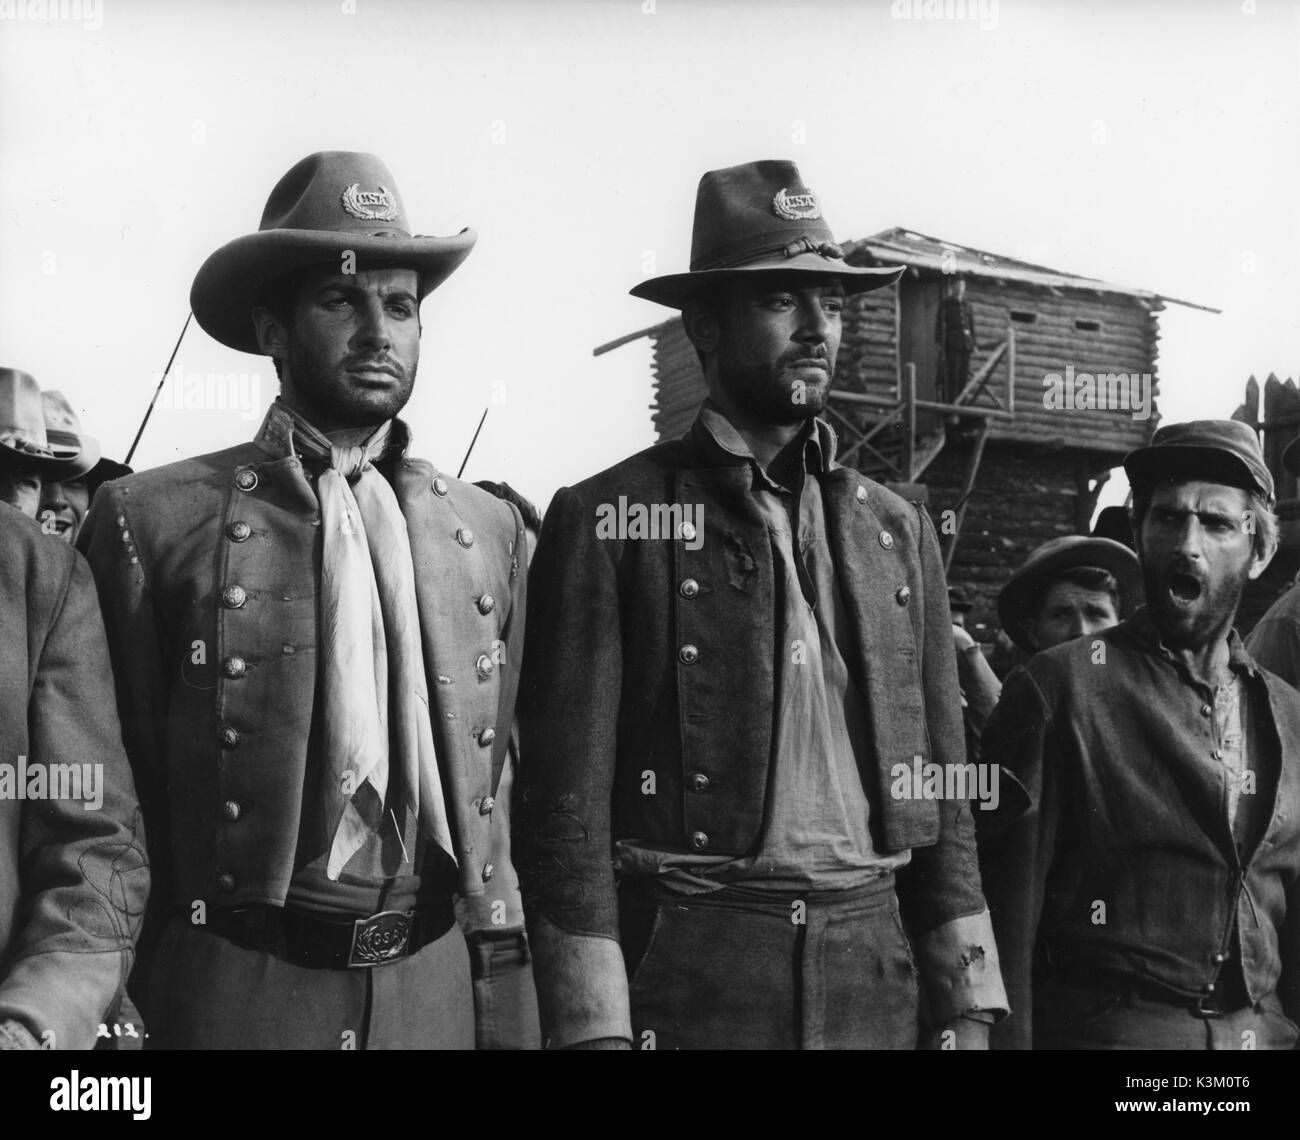 A TIME FOR KILLING aka THE LONG RIDE HOME GEORGE HAMILTON, TODD ARMSTRONG, HARRY DEAN STANTON       Date: 1967 Stock Photo